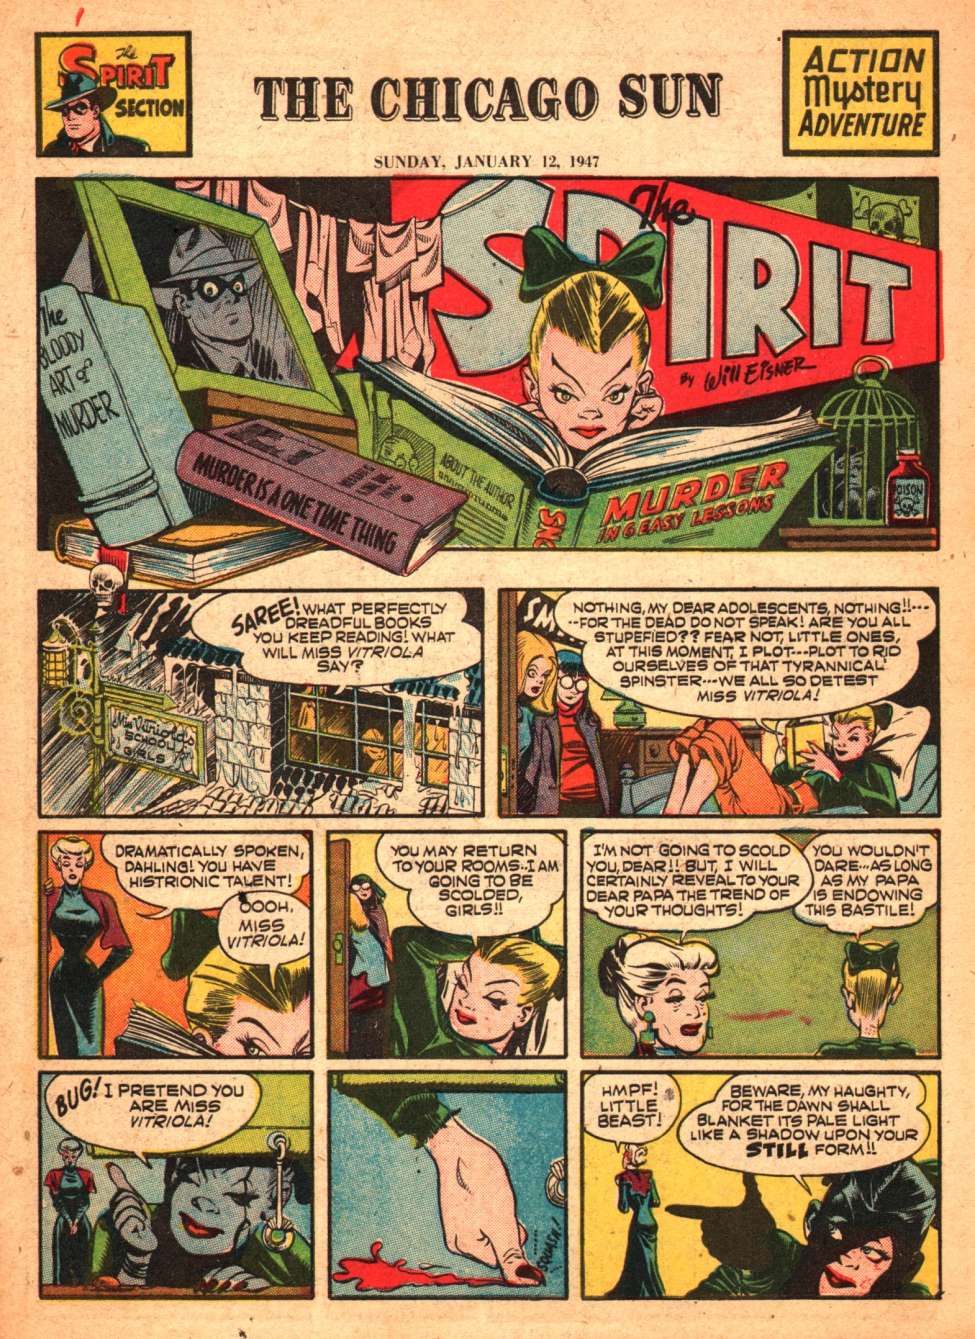 Book Cover For The Spirit (1947-01-12) - Chicago Sun